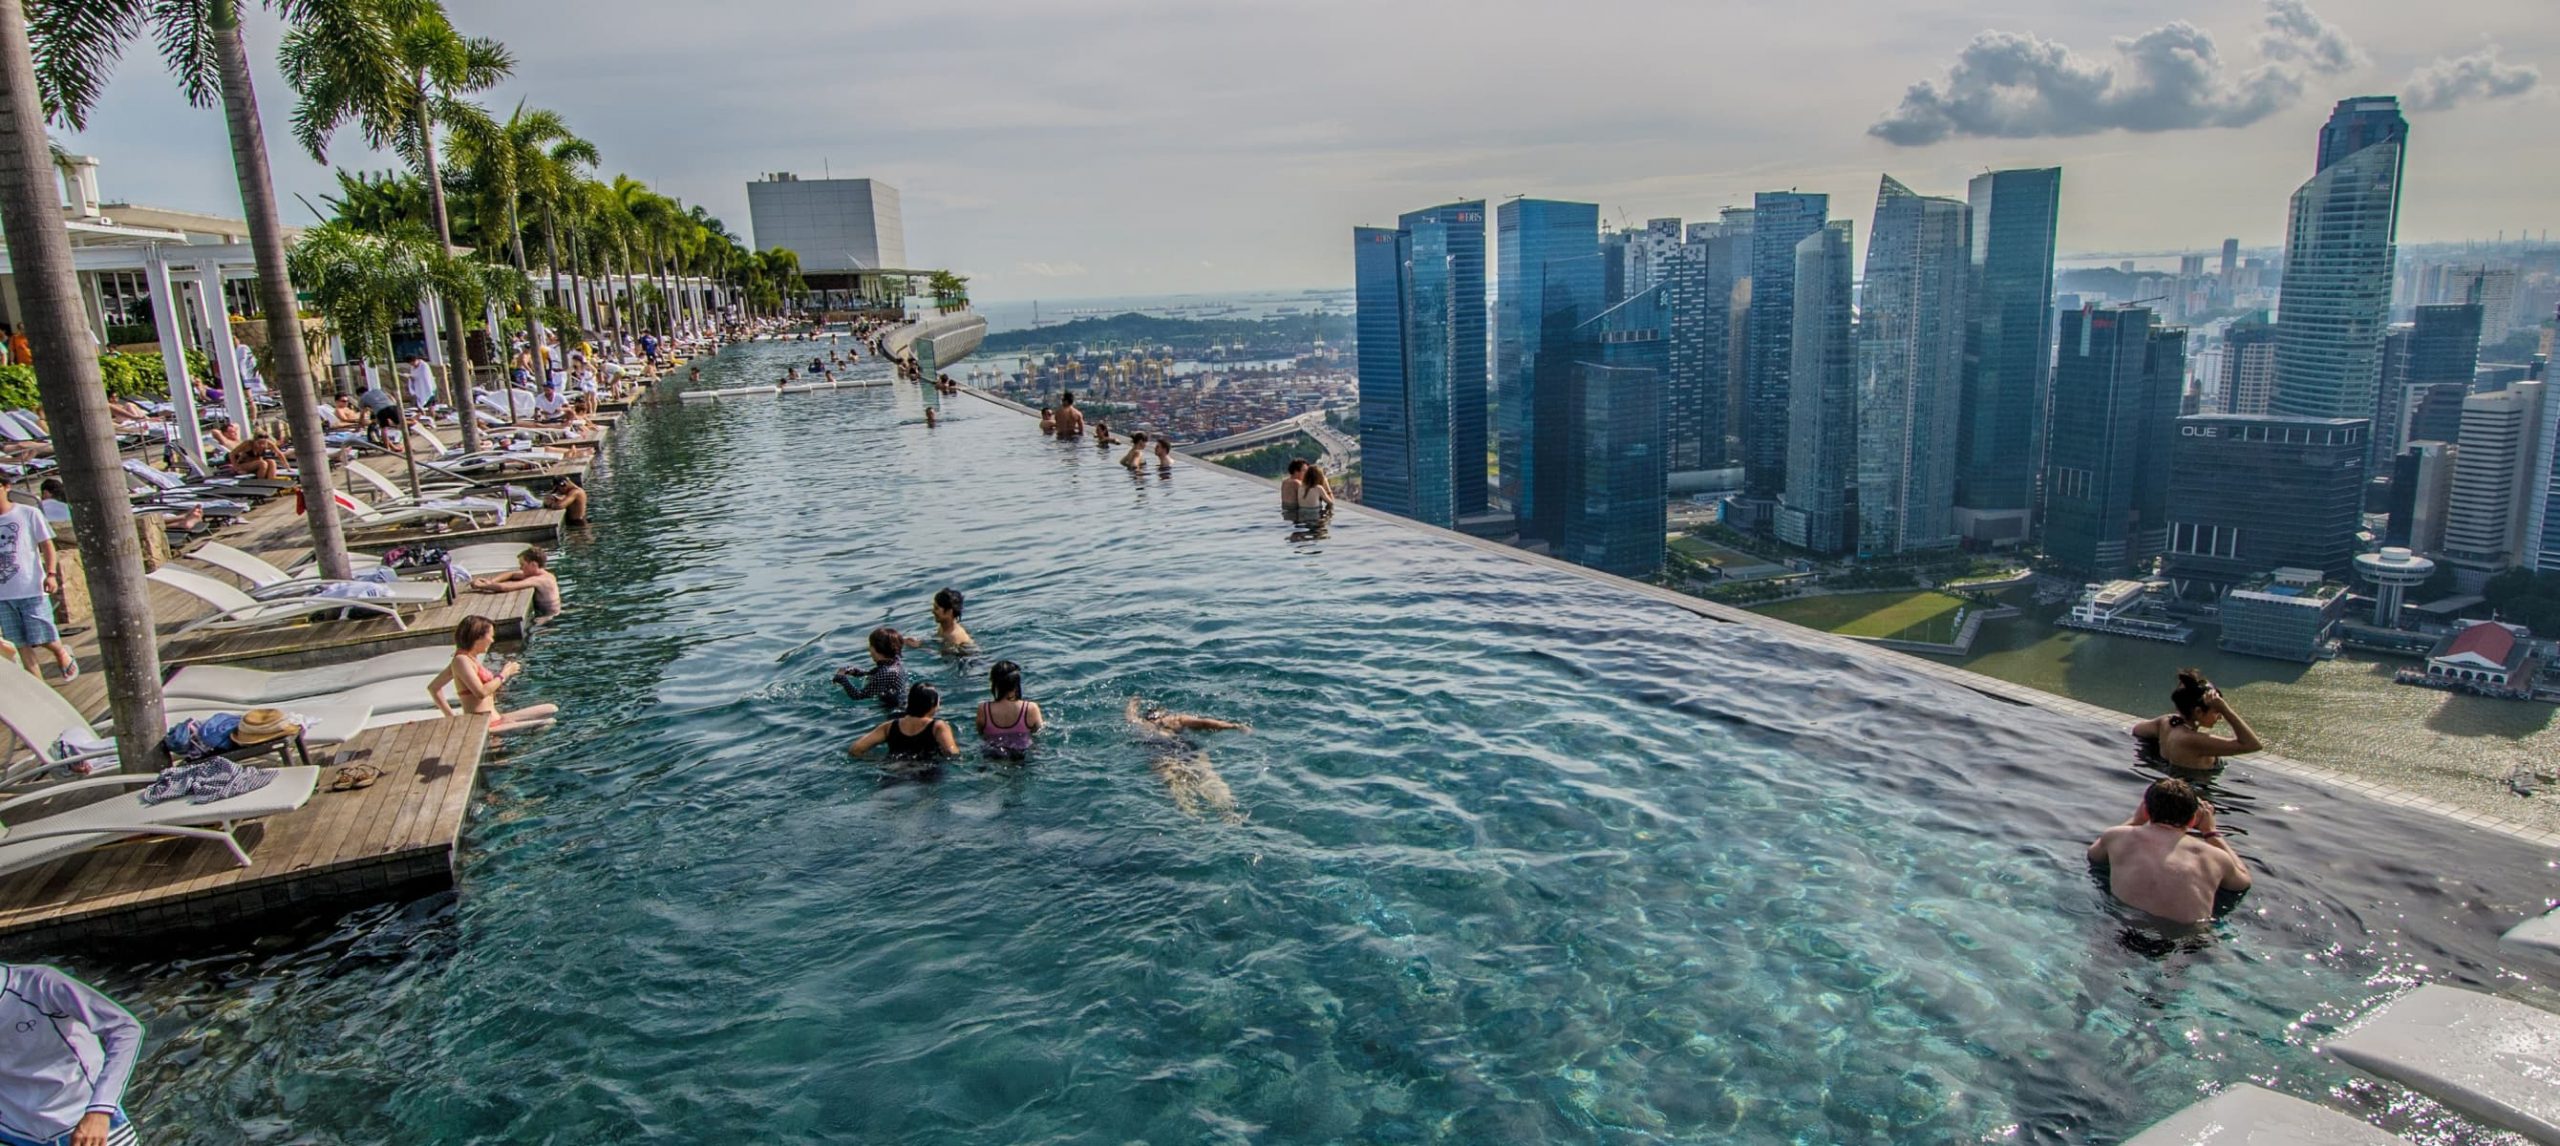 The infinity pool of Singapore's Marina Bay Sands Hotel.